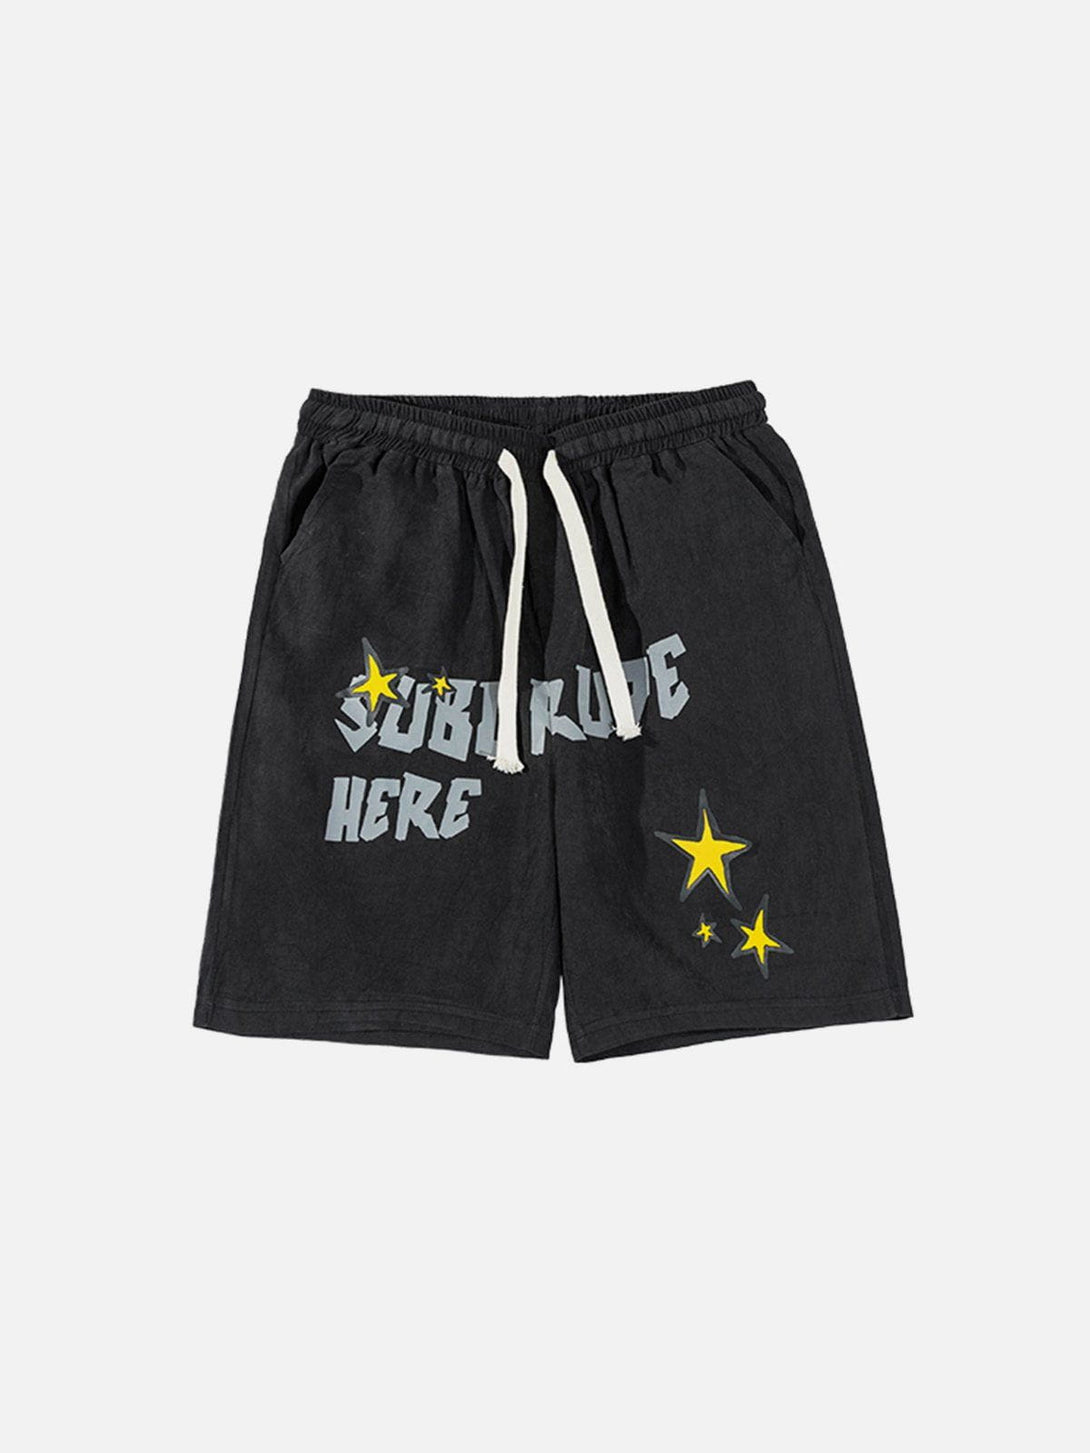 Majesda® - Letter Stars Graphic Shorts outfit ideas streetwear fashion